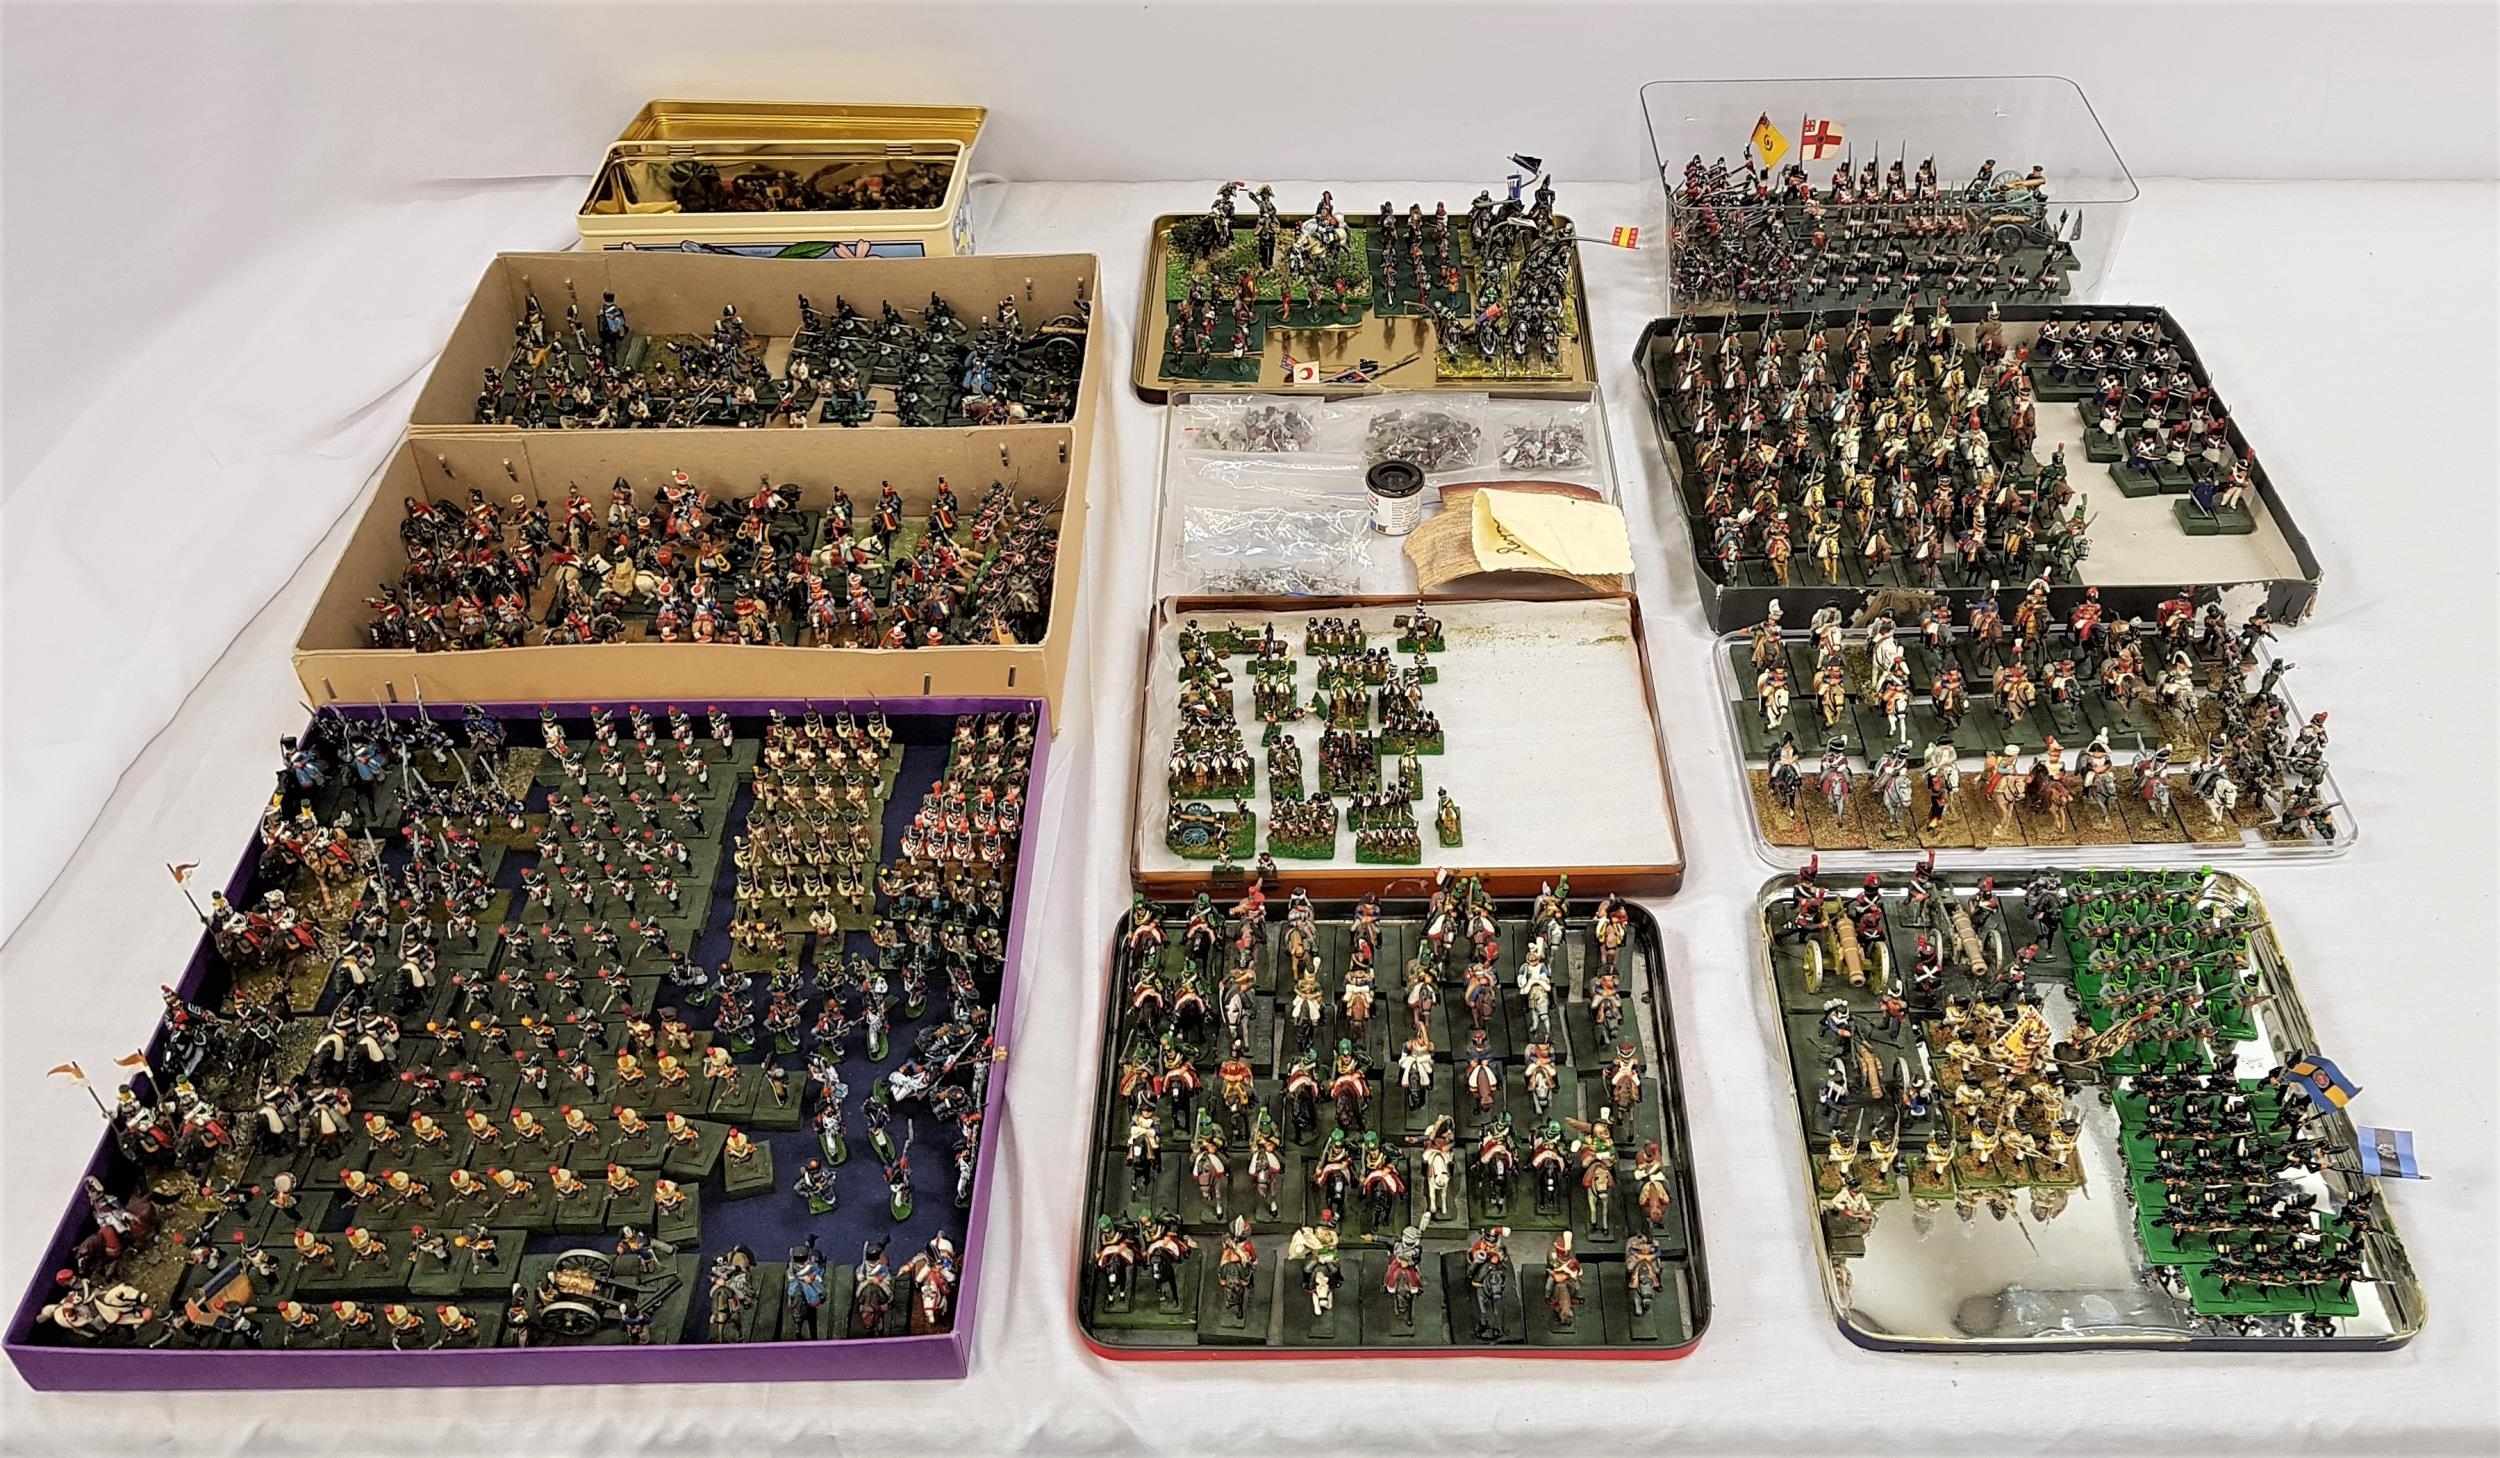 VERY LARGE SELECTION OF HAND PAINTED LEAD SOLDIERS various countries, regiments and ranks, including